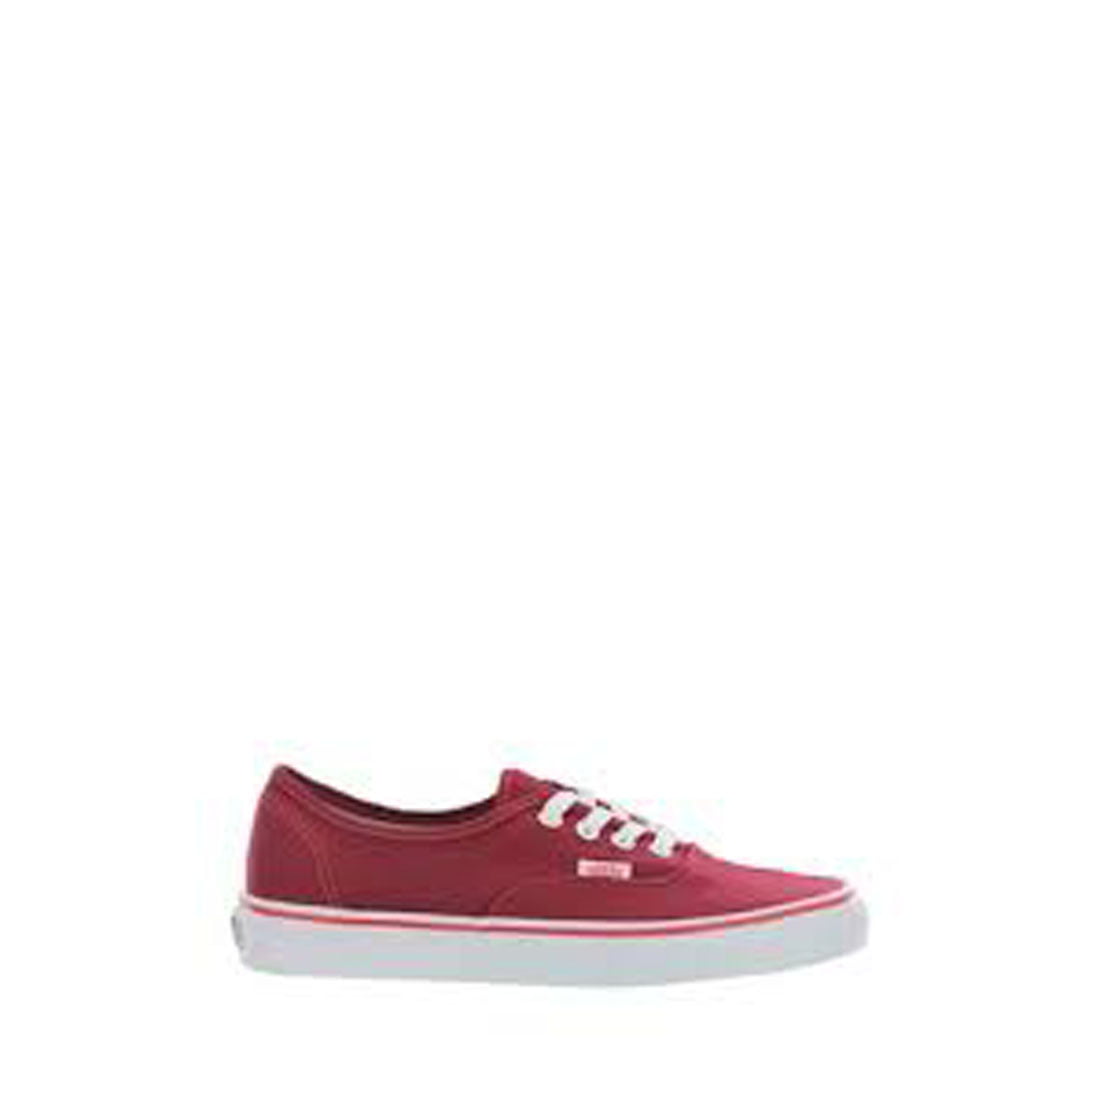 Details about   Vans Authentic Pop Check Rhubarb Bittersweet VN0004MKII0 Men's Size 8 